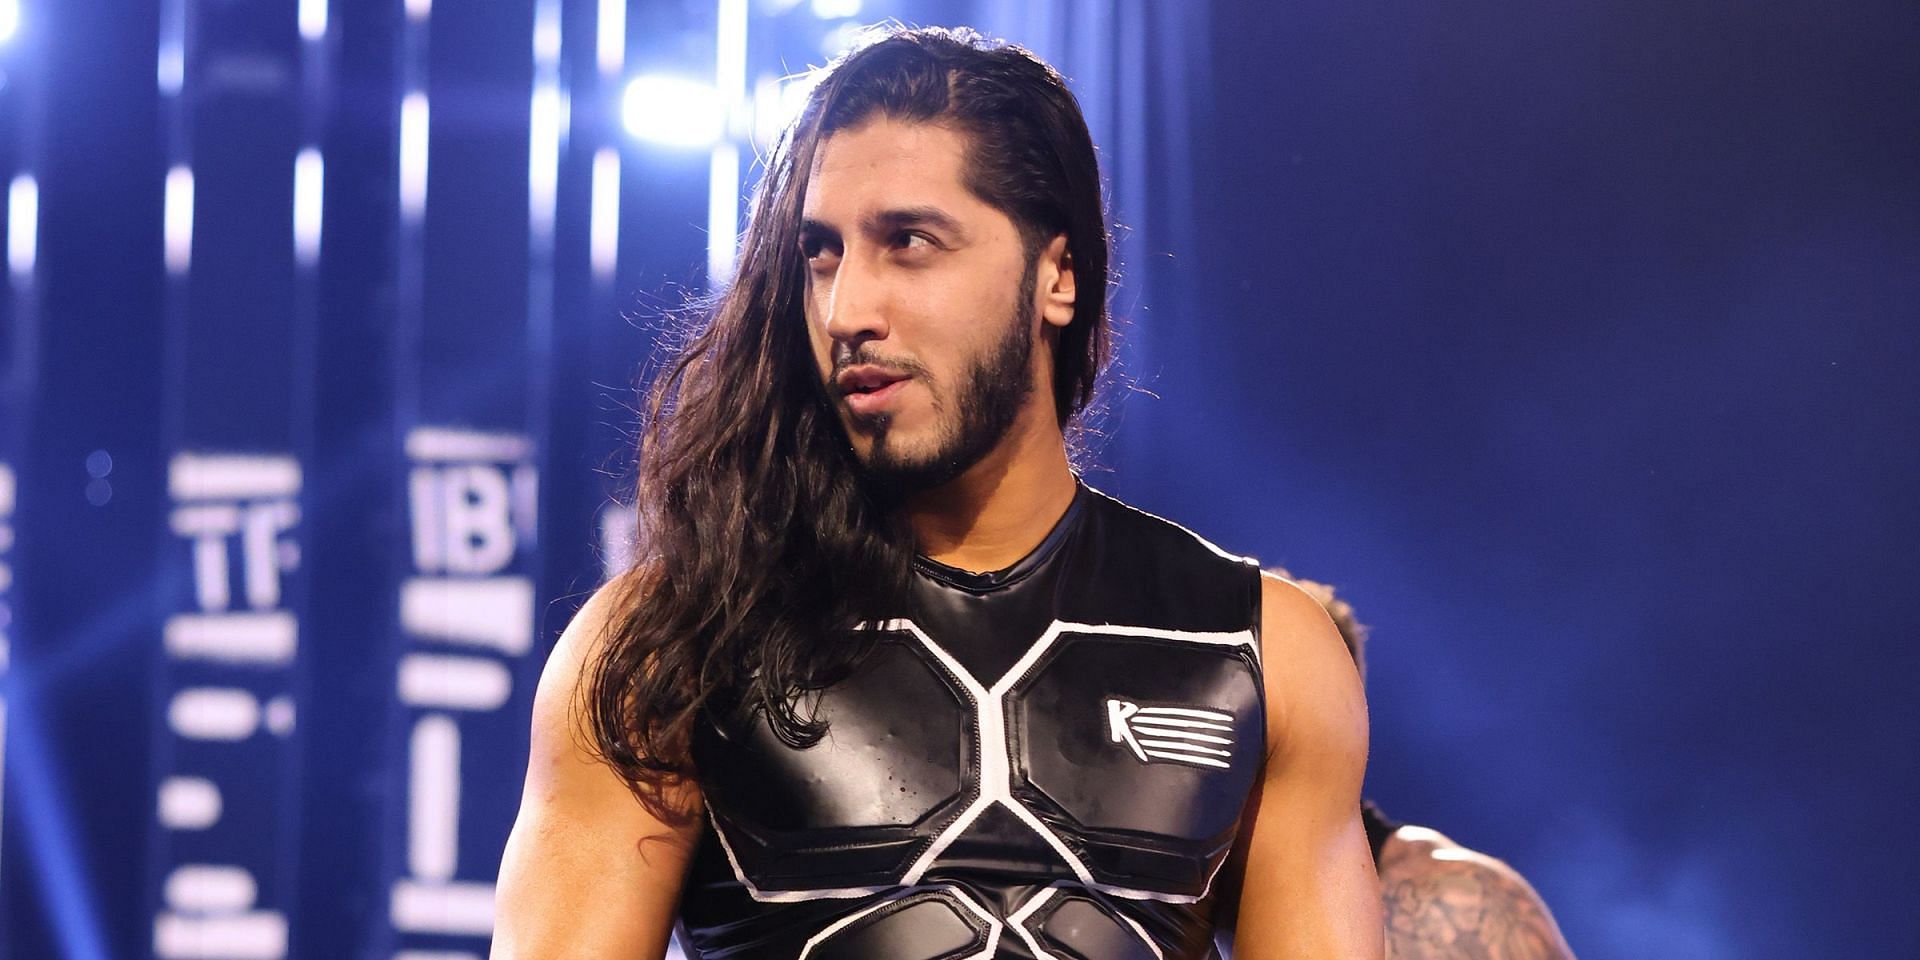 Mustafa Ali will be donating his Crown Jewel payday to charity